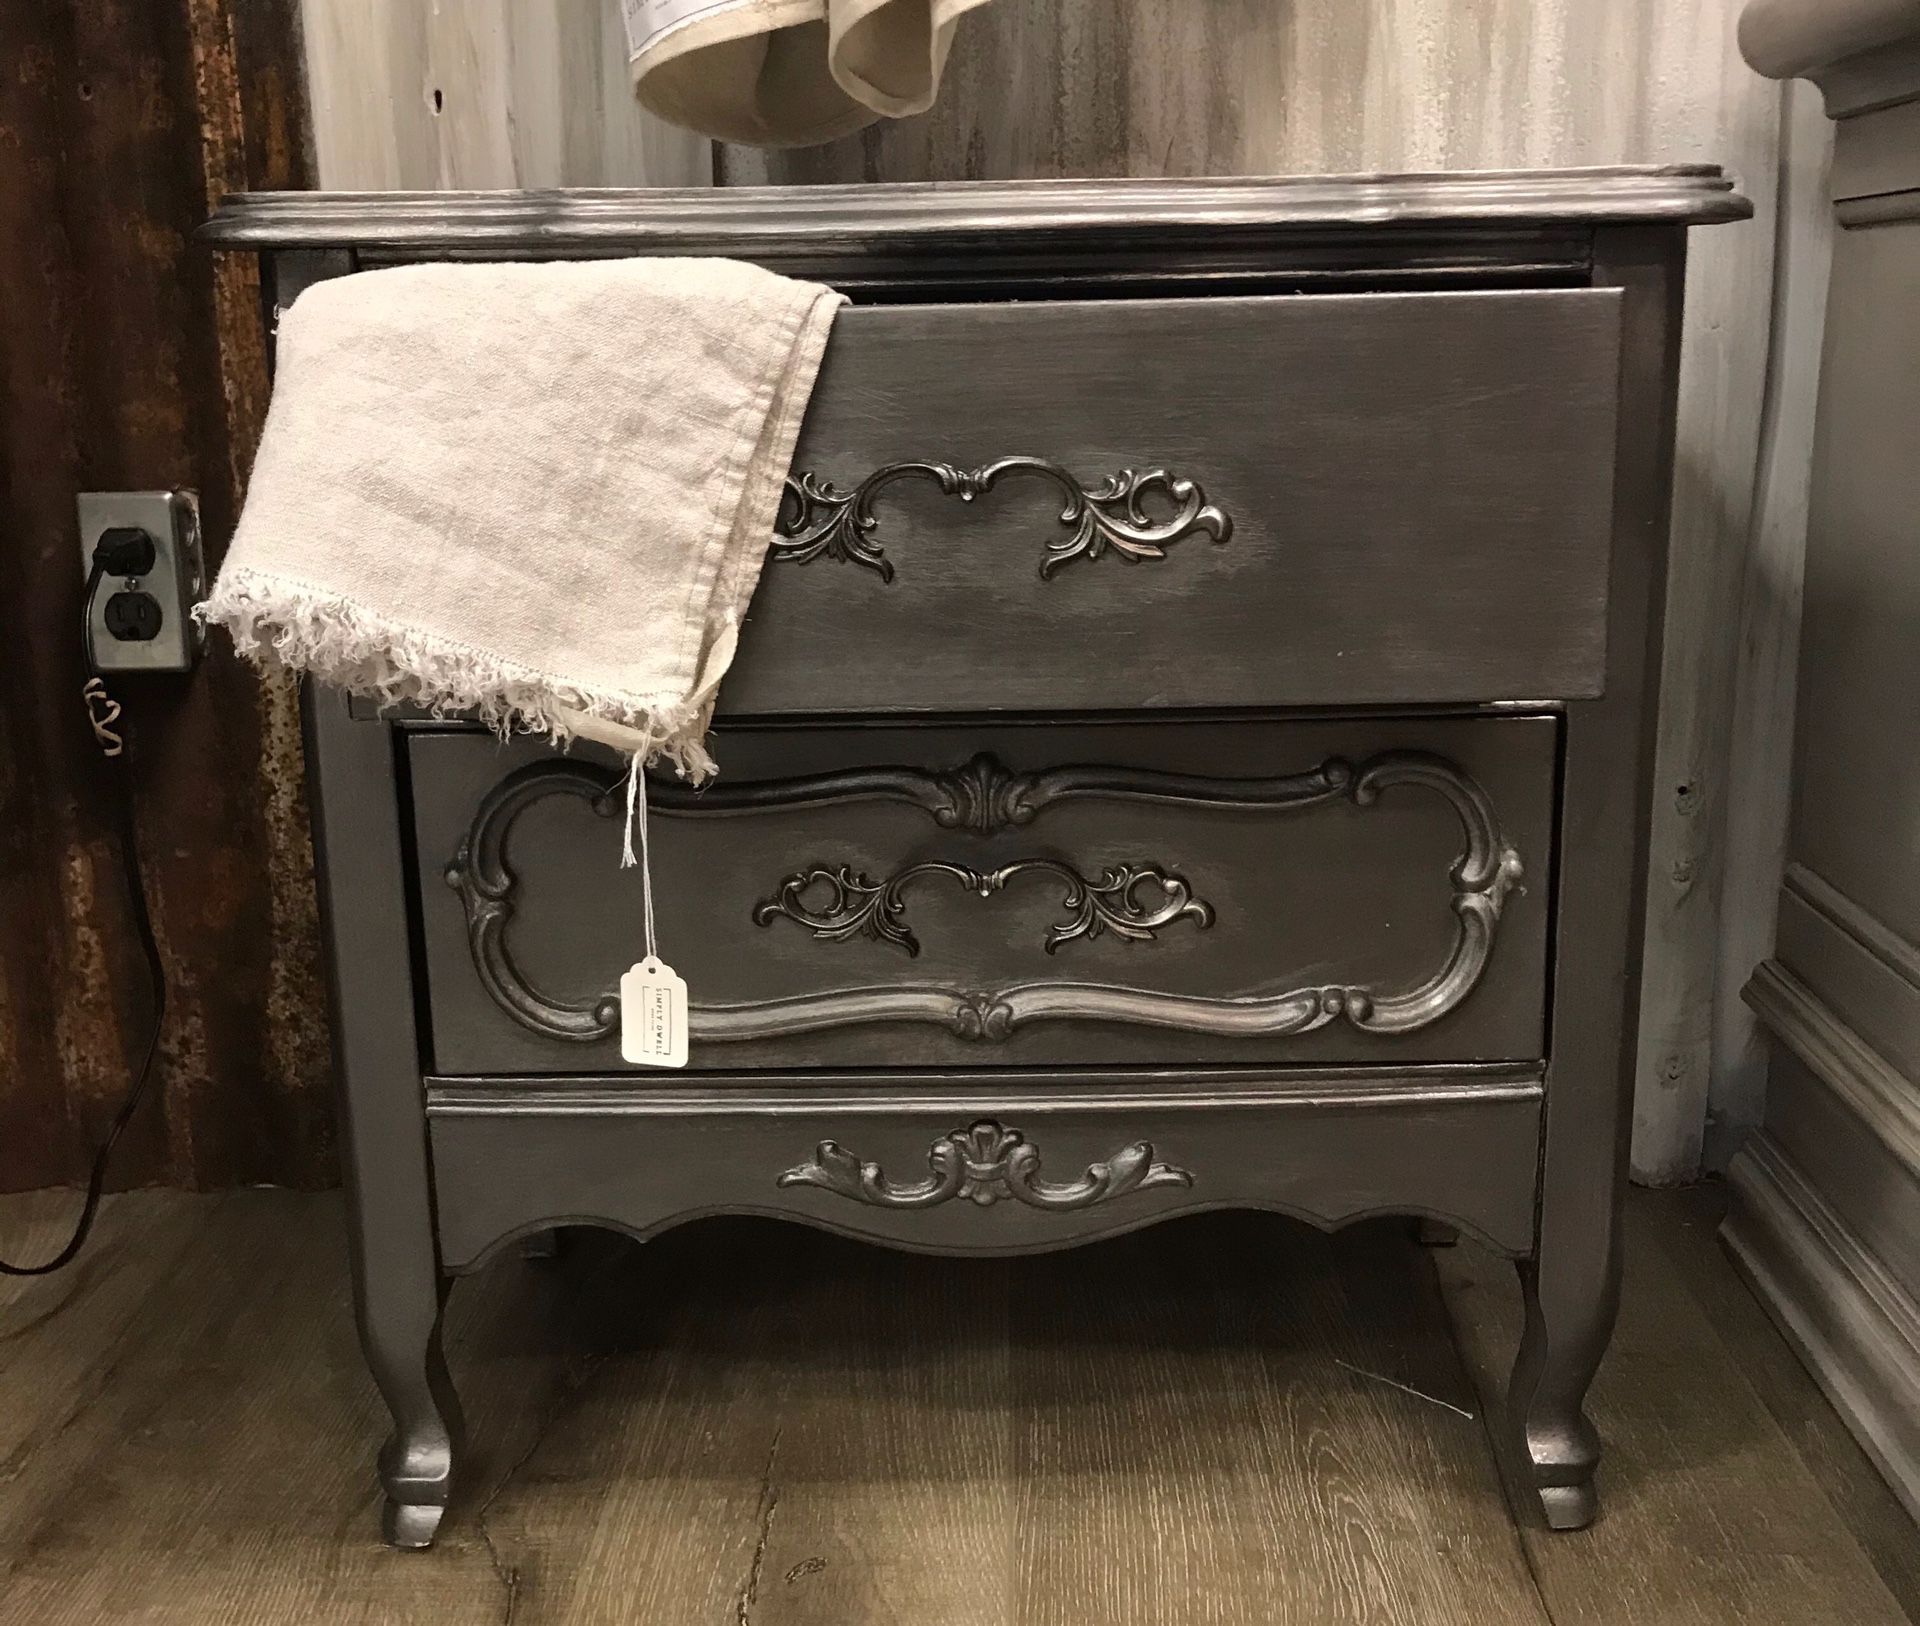 Metallic Gunmetal Gray painted End Table with Fabric Lined Drawers!